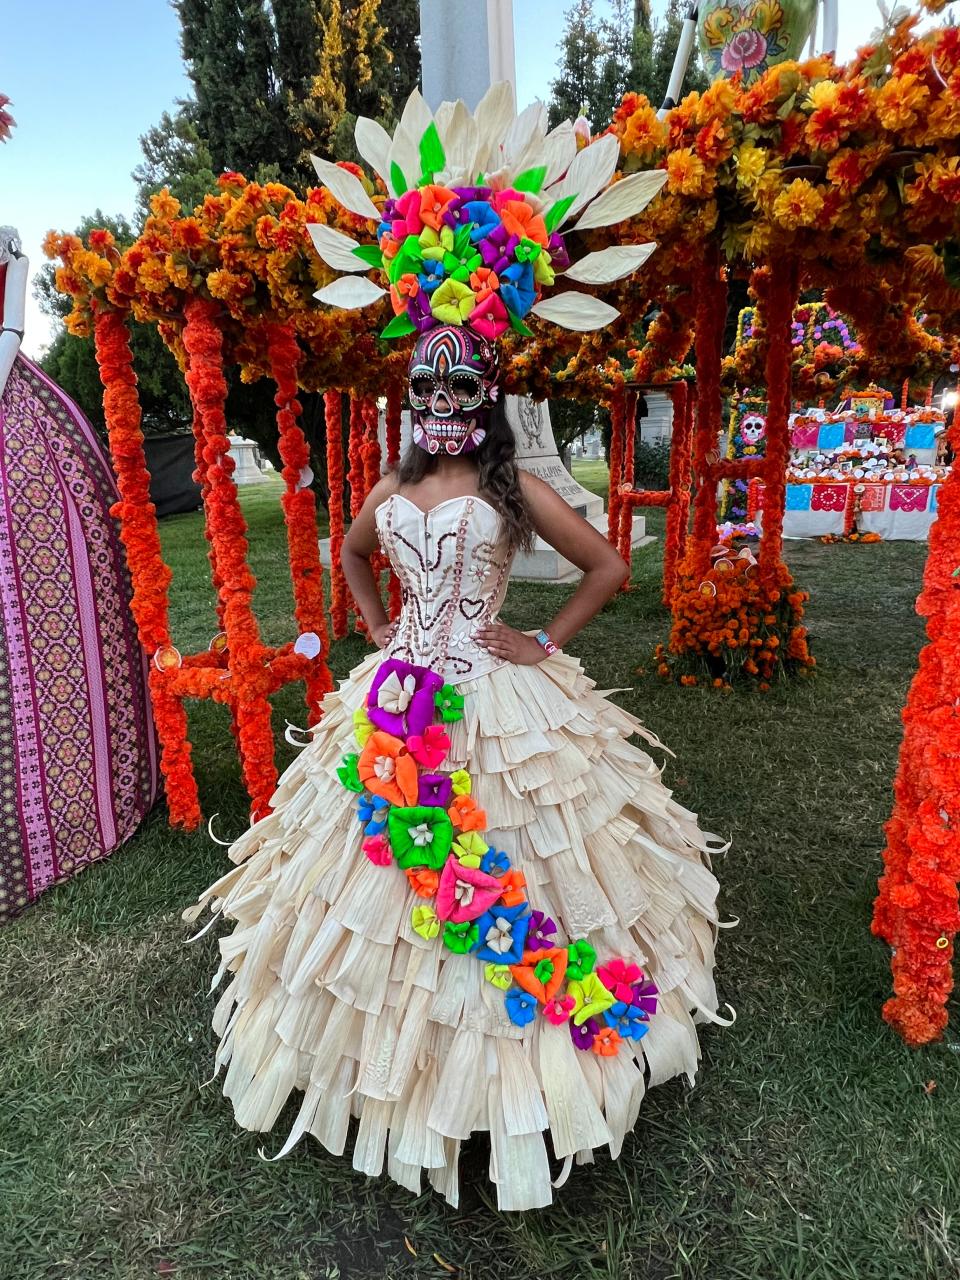 Daniela Rico, a 17-year-old from Riverside, California, poses in front of an altar during the Día de Los Muertos celebration at the Hollywood Forever Cemetery in Los Angeles on Saturday, Oct. 28, 2023.